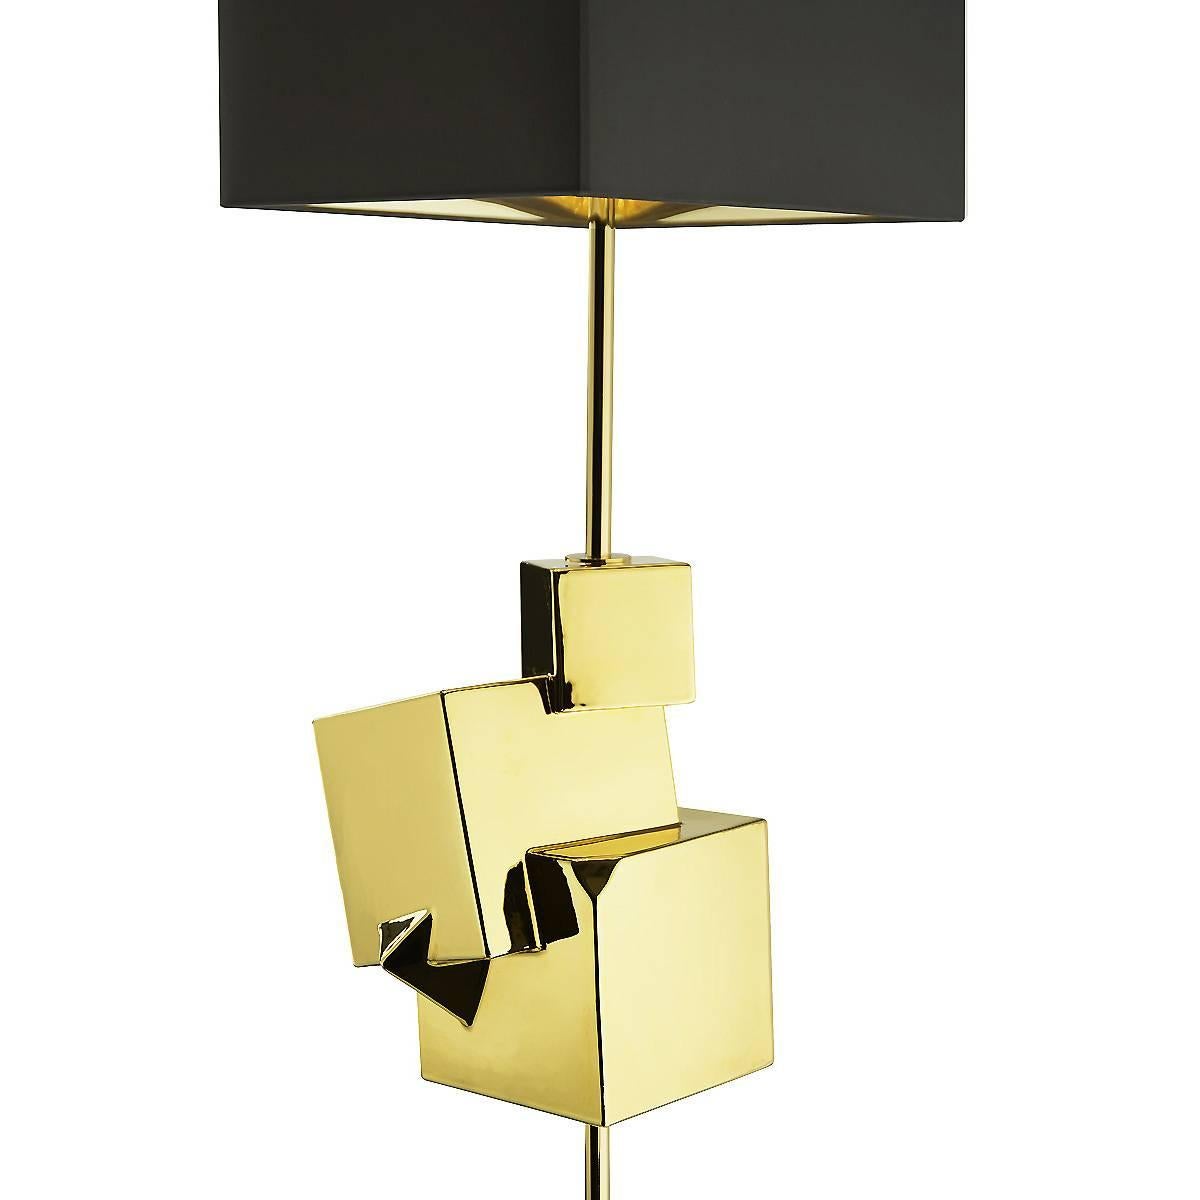 Made of metal and ceramics, this striking floor lamp will make a statement in a contemporary living room, thanks to its warm gold color and the decorations that adorn its structure in the shape of cubes of different sizes that create a dynamic